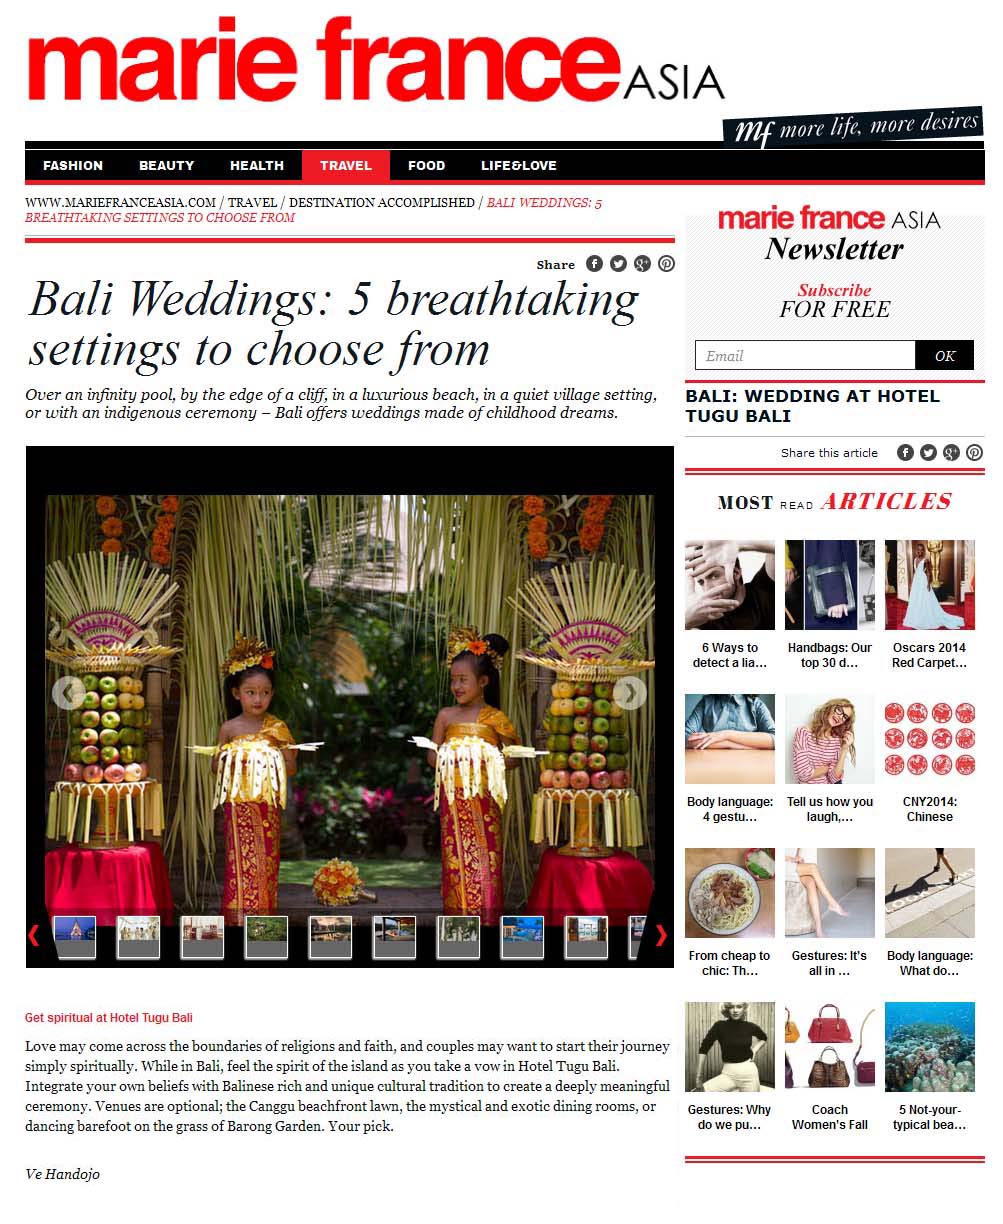 marie france asia: bali weddings - 5 breathaking settings to choose from